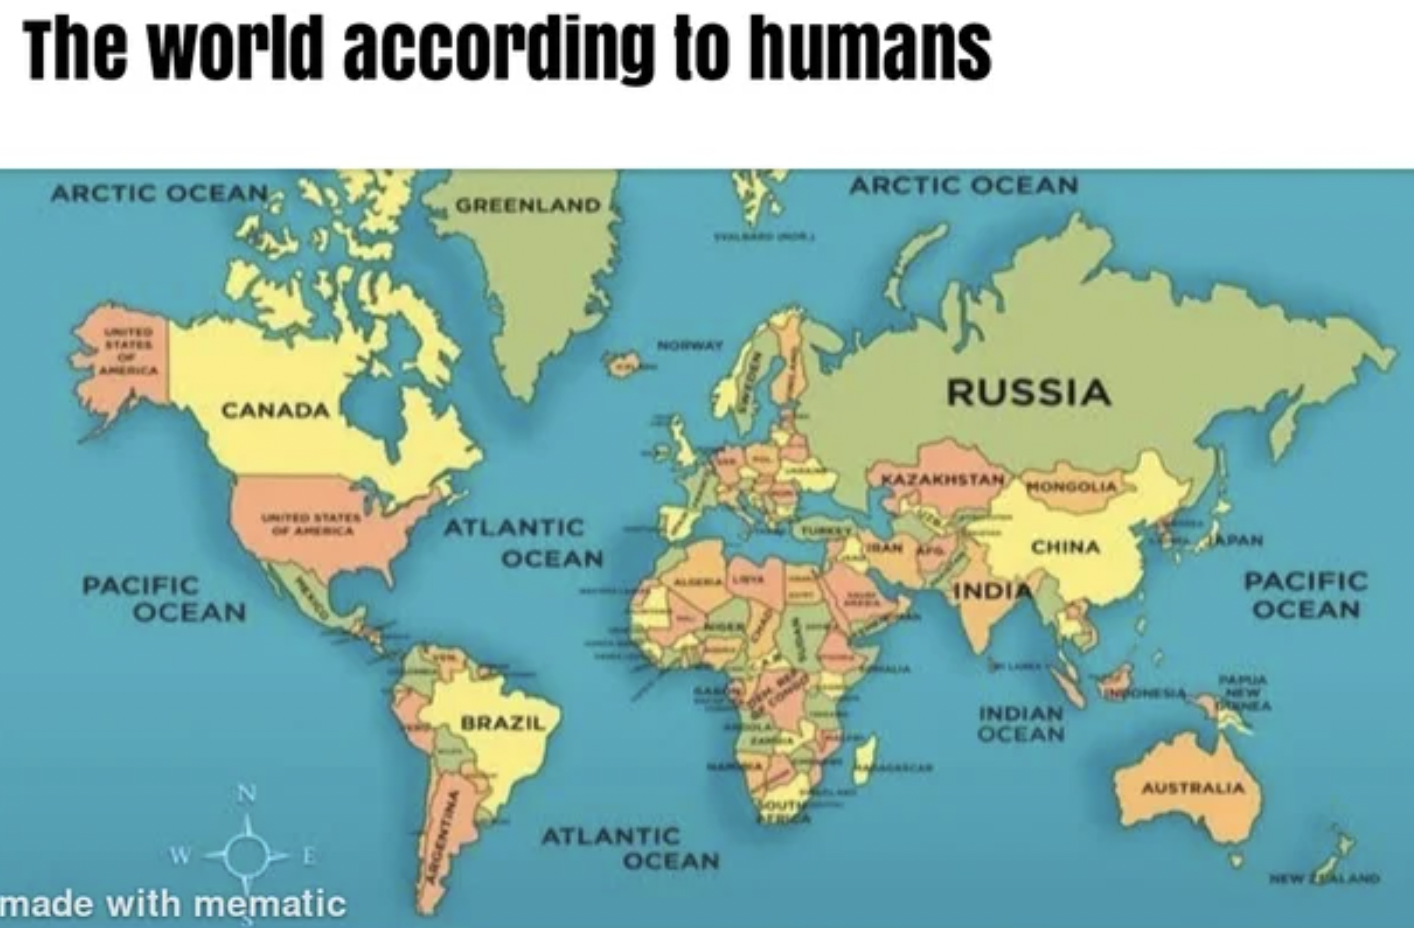 Memes that tell the truth - world map in english - The world according to humans Arctic Ocean www States Canada Pacific Ocean made with mematic Greenland Atlantic Ocean Brazil Atlantic Ocean Arctic Ocean Russia Kazakhstan Mongolia China India Indian Ocean